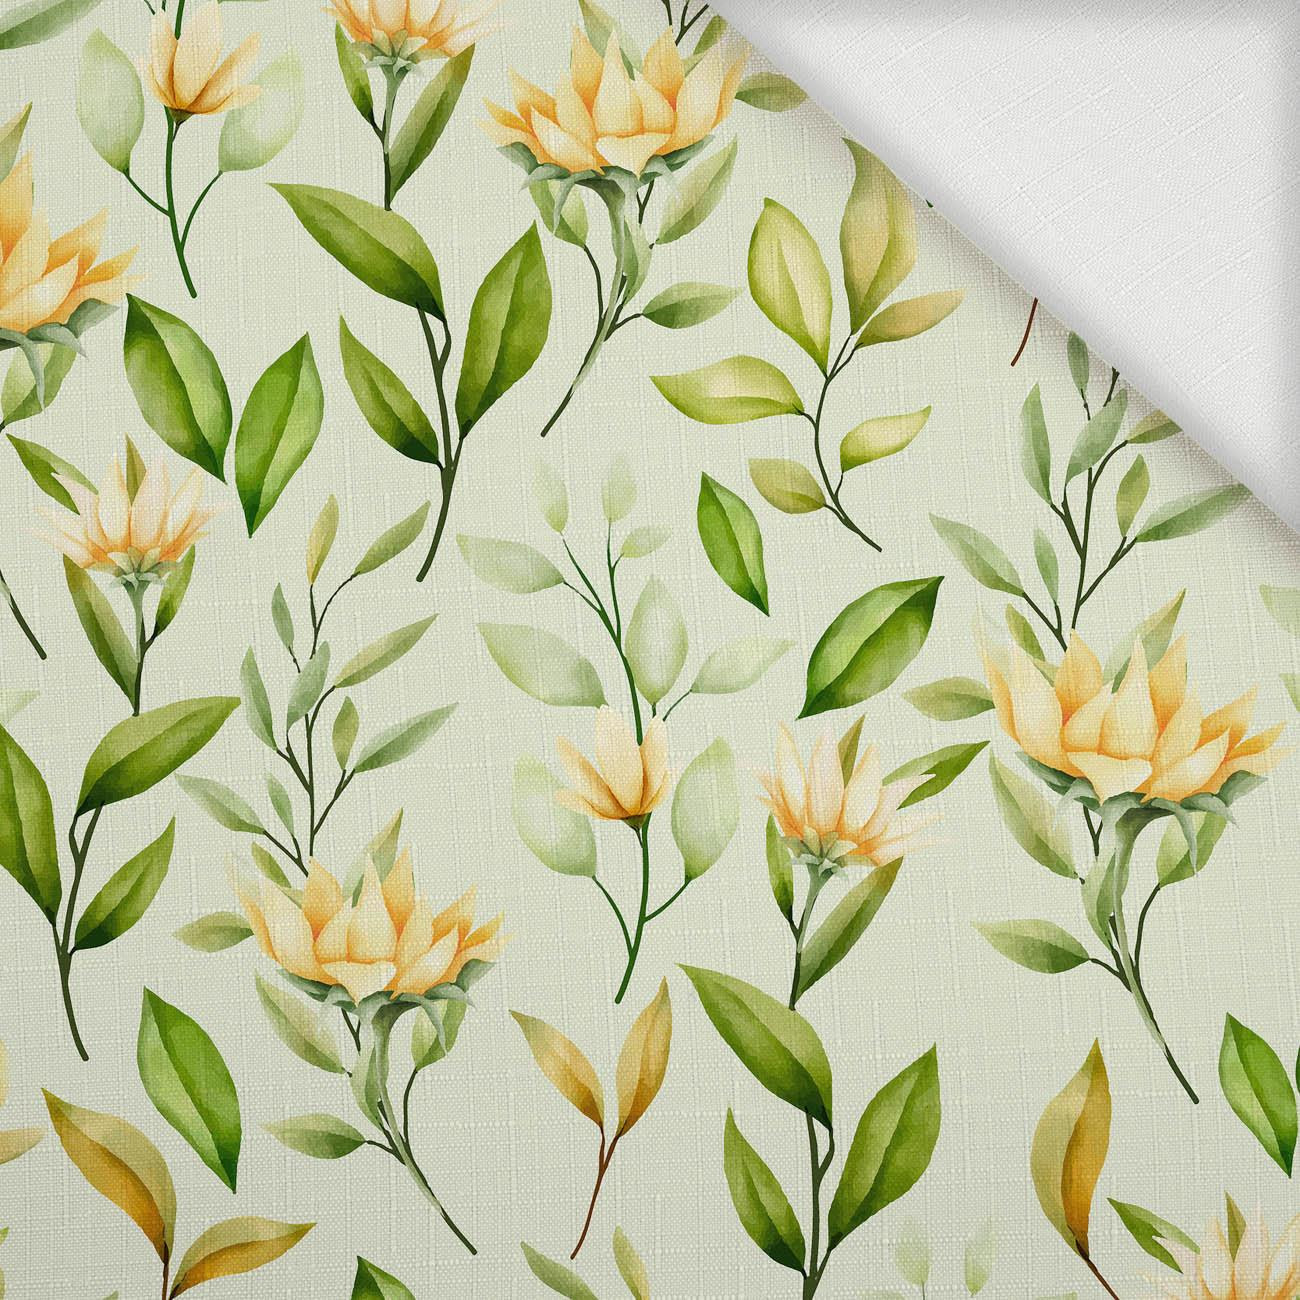 PASTEL SUNFLOWERS PAT. 2 - Woven Fabric for tablecloths